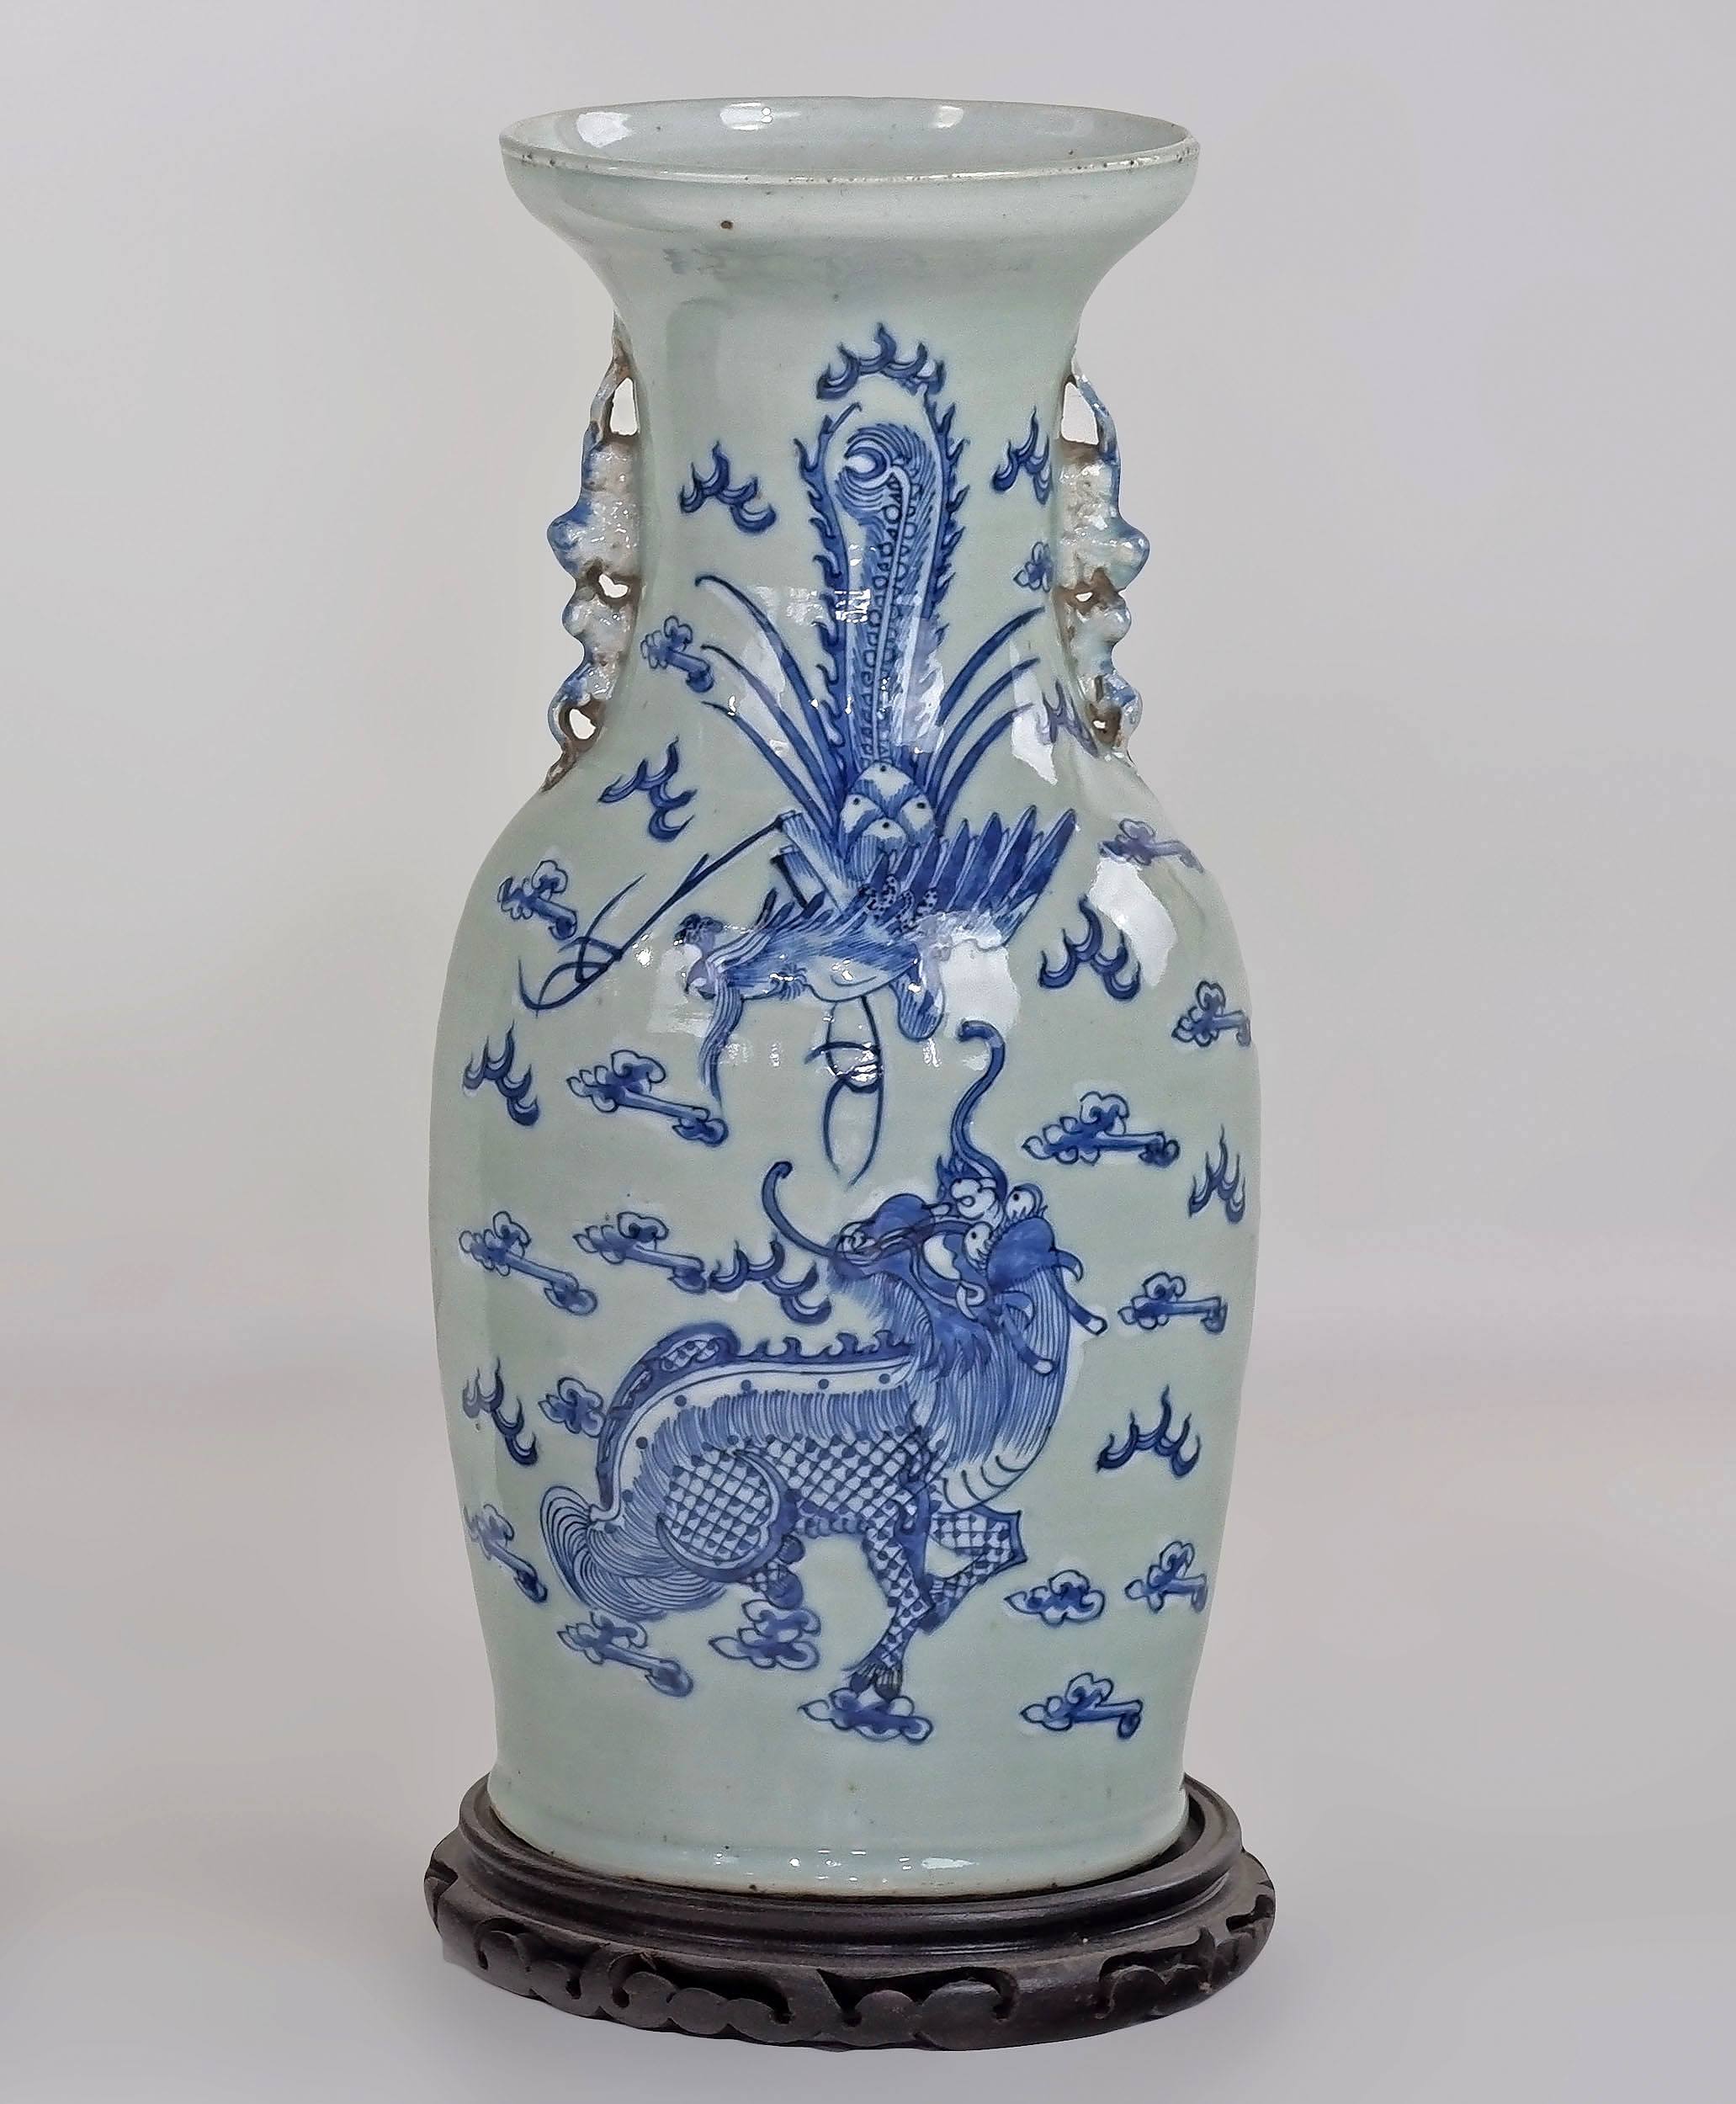 'Chinese Celadon Ground and Underglaze Blue and White Vase Decorated with a Kylin and Phoenix, Late 19th/Early 20th Century'